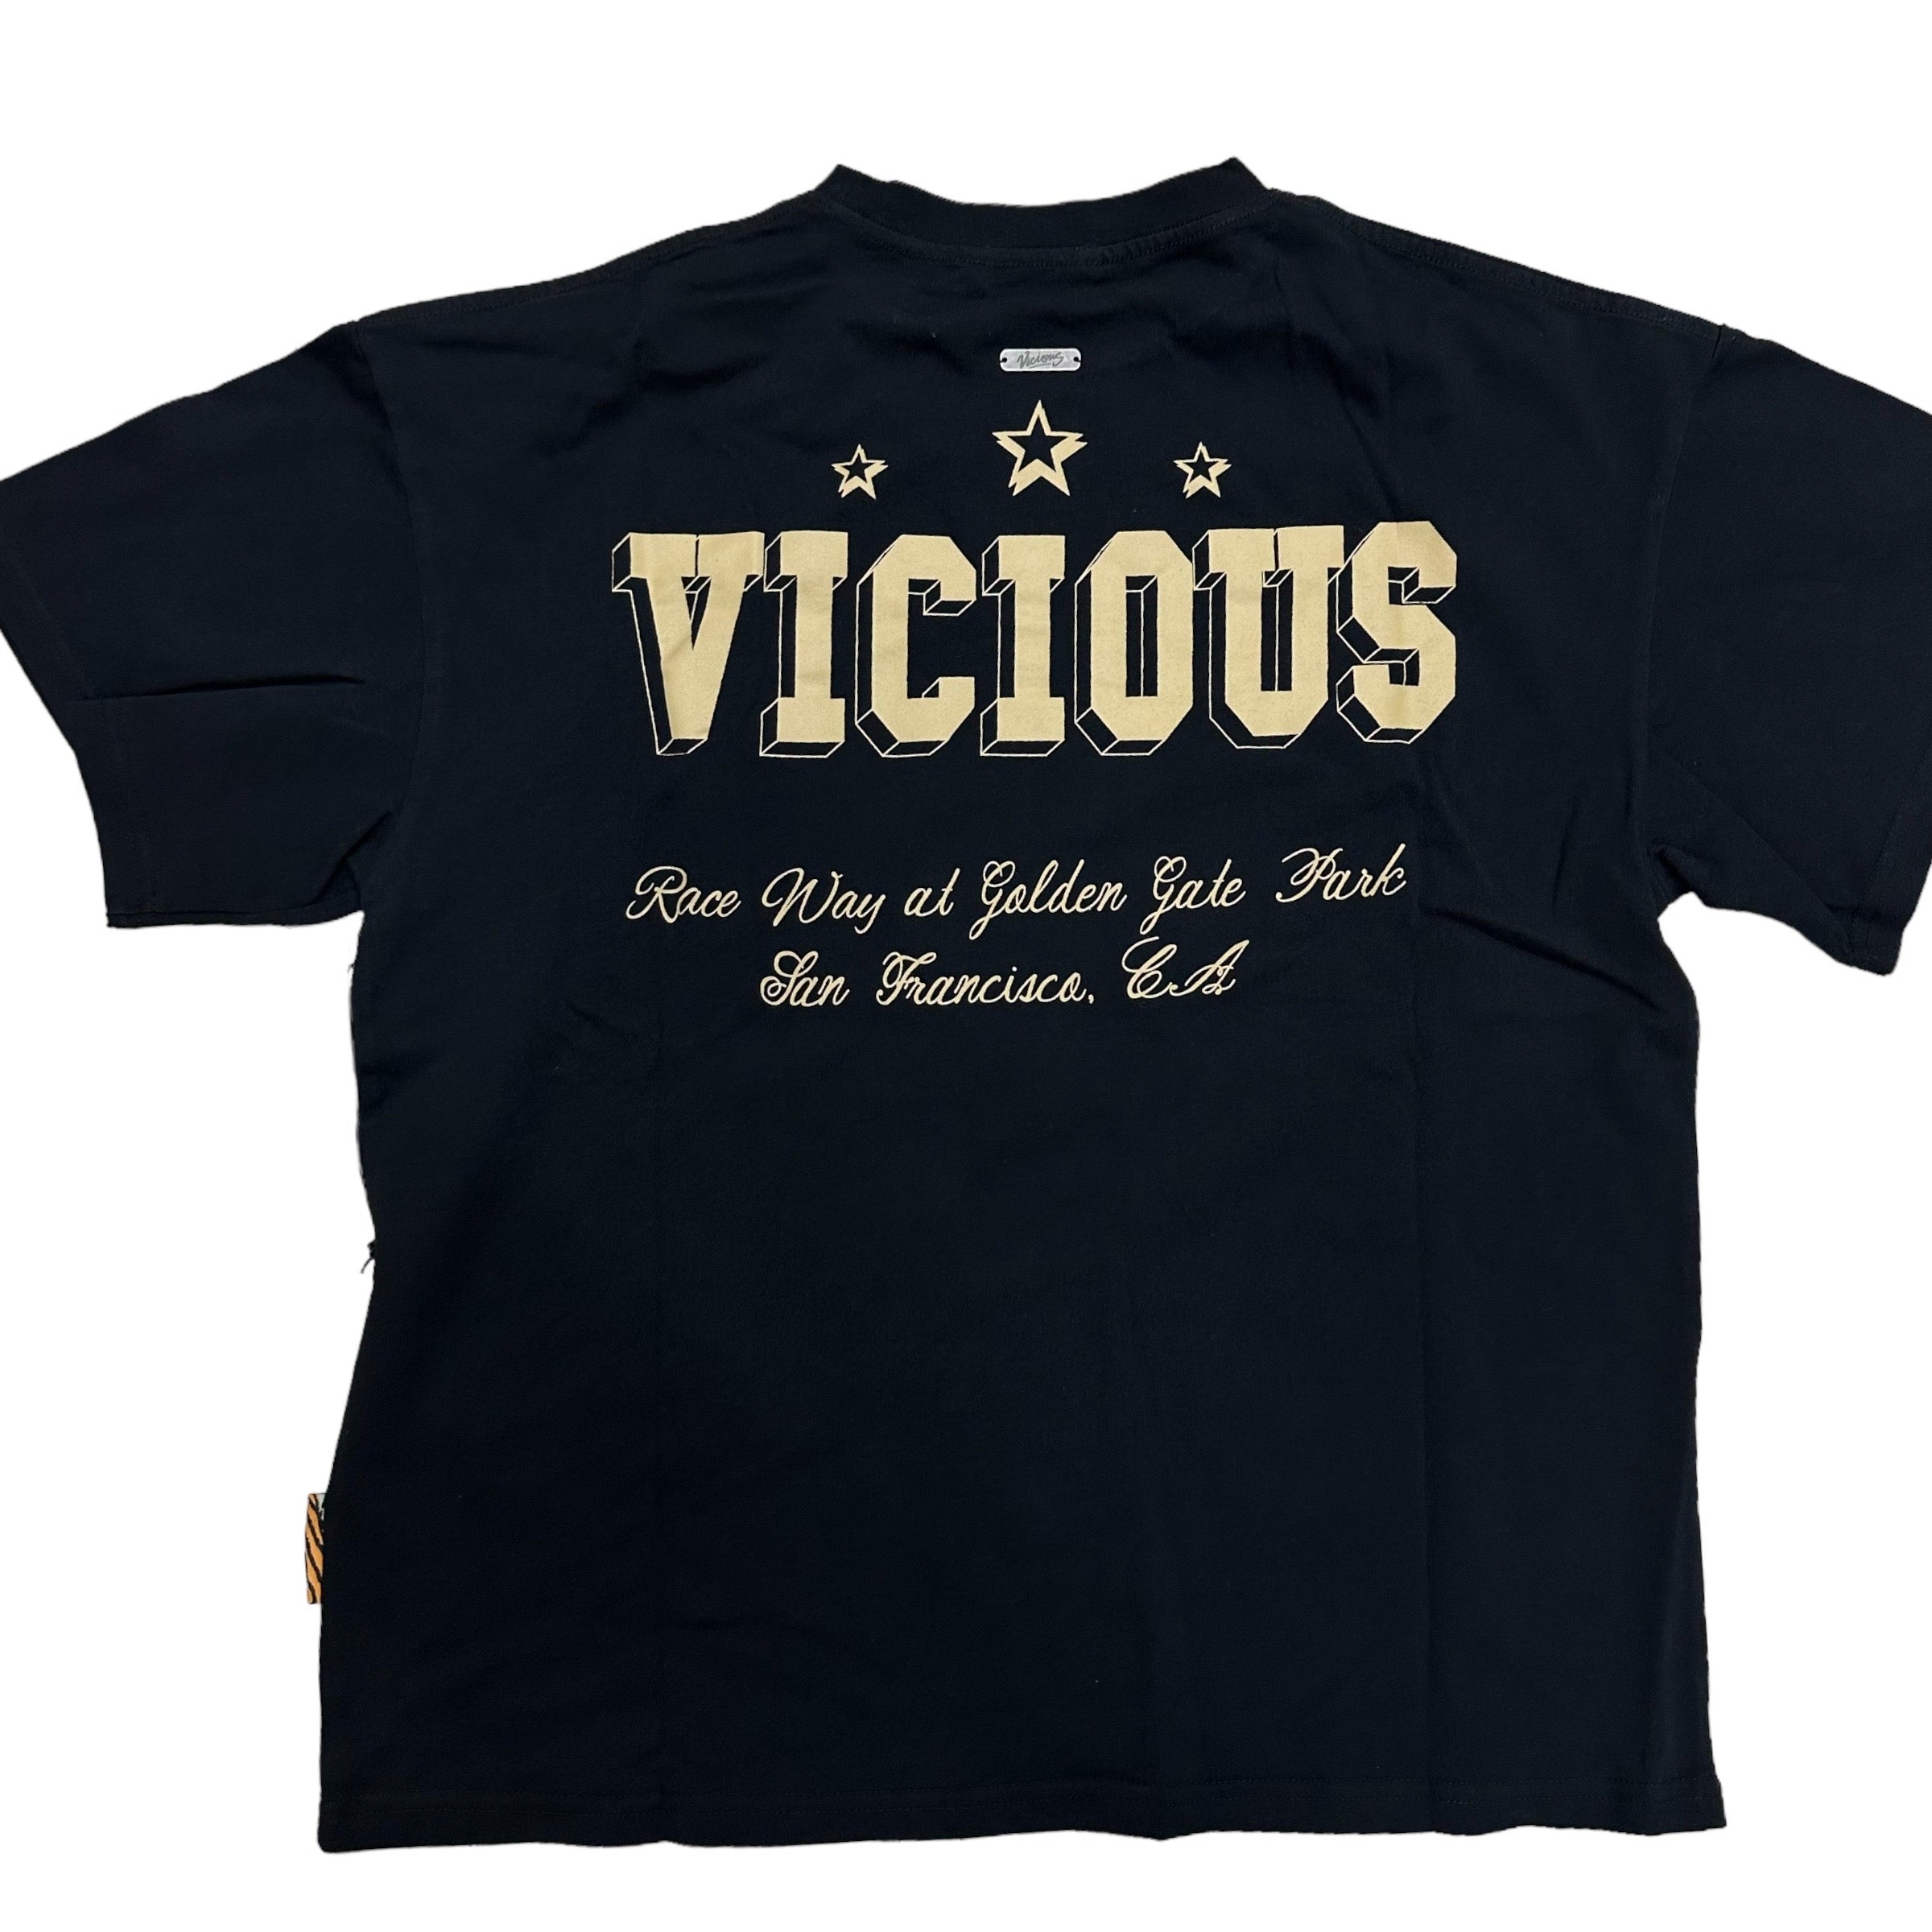 Vicious Derby Distressed over size T-shirt Black 450